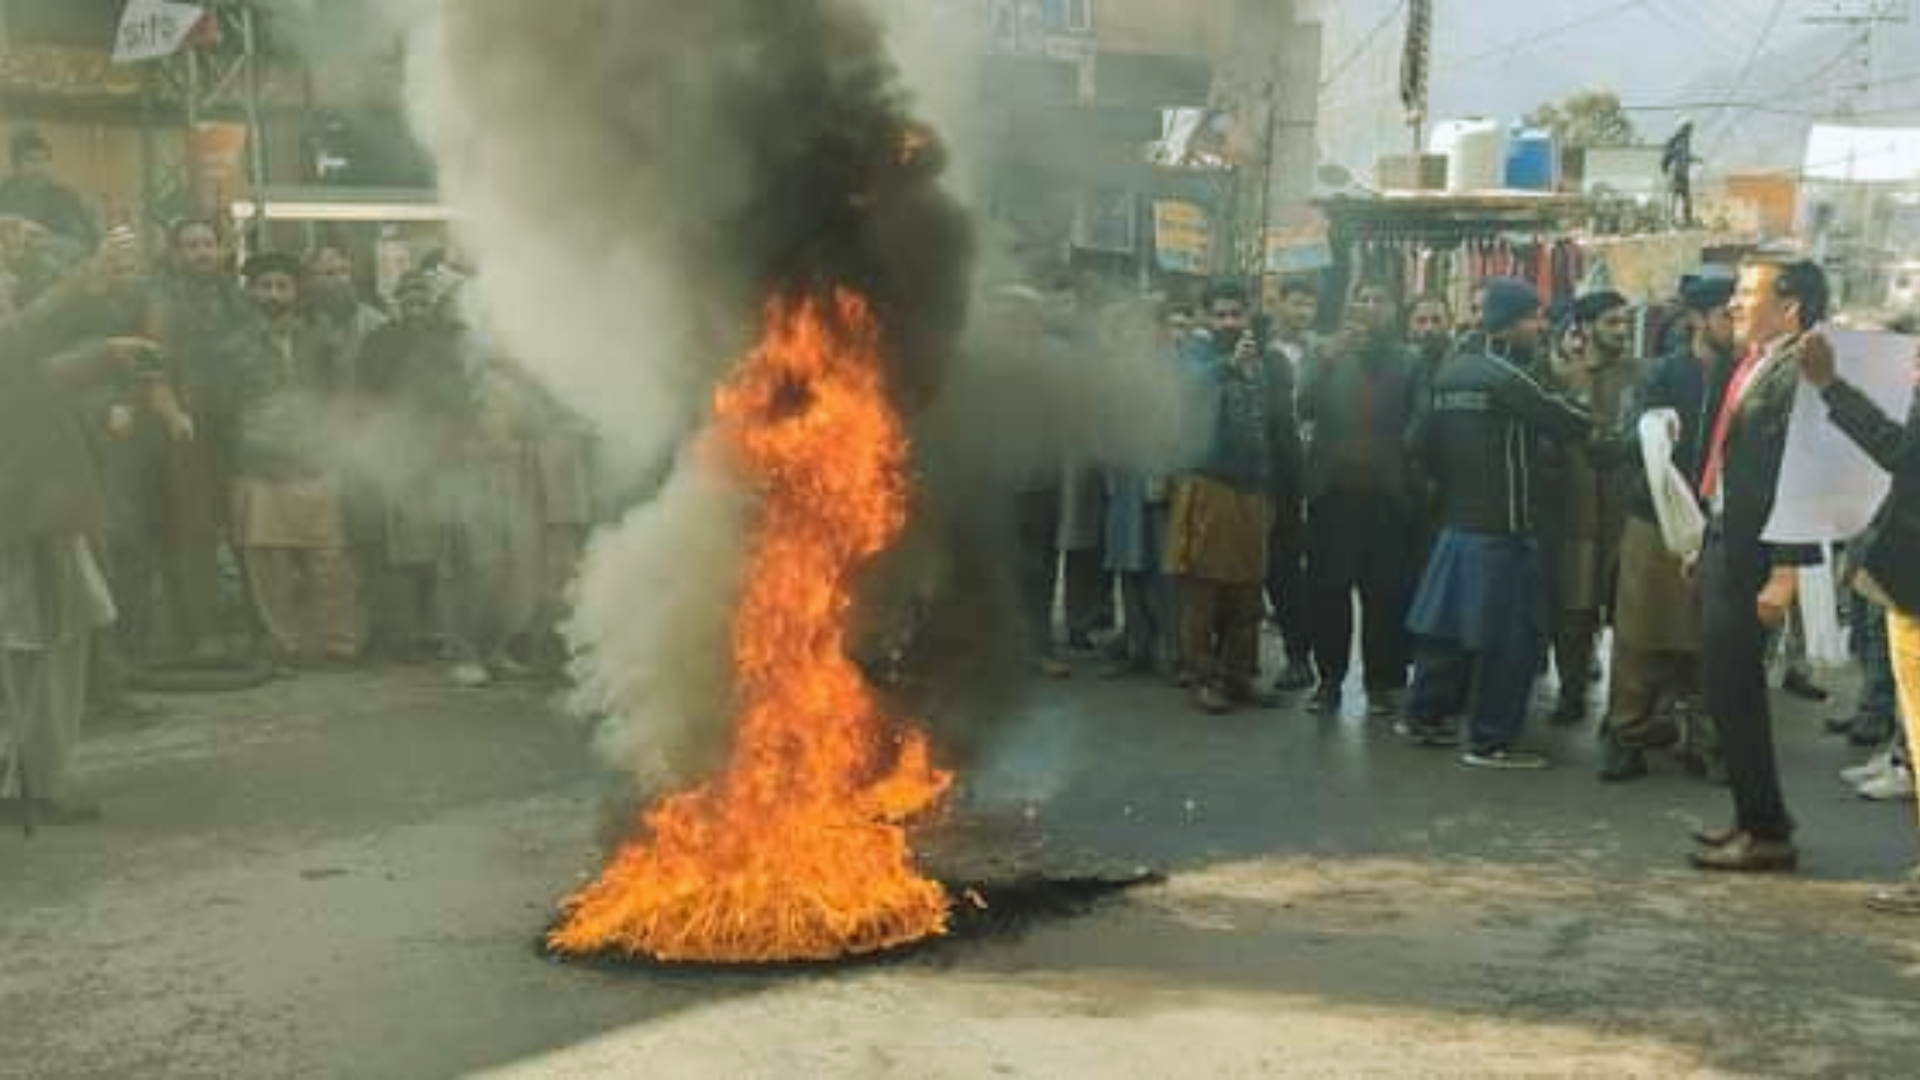 PoK Clashes After Police Arrest Committee Leaders Amid Inflation Protest